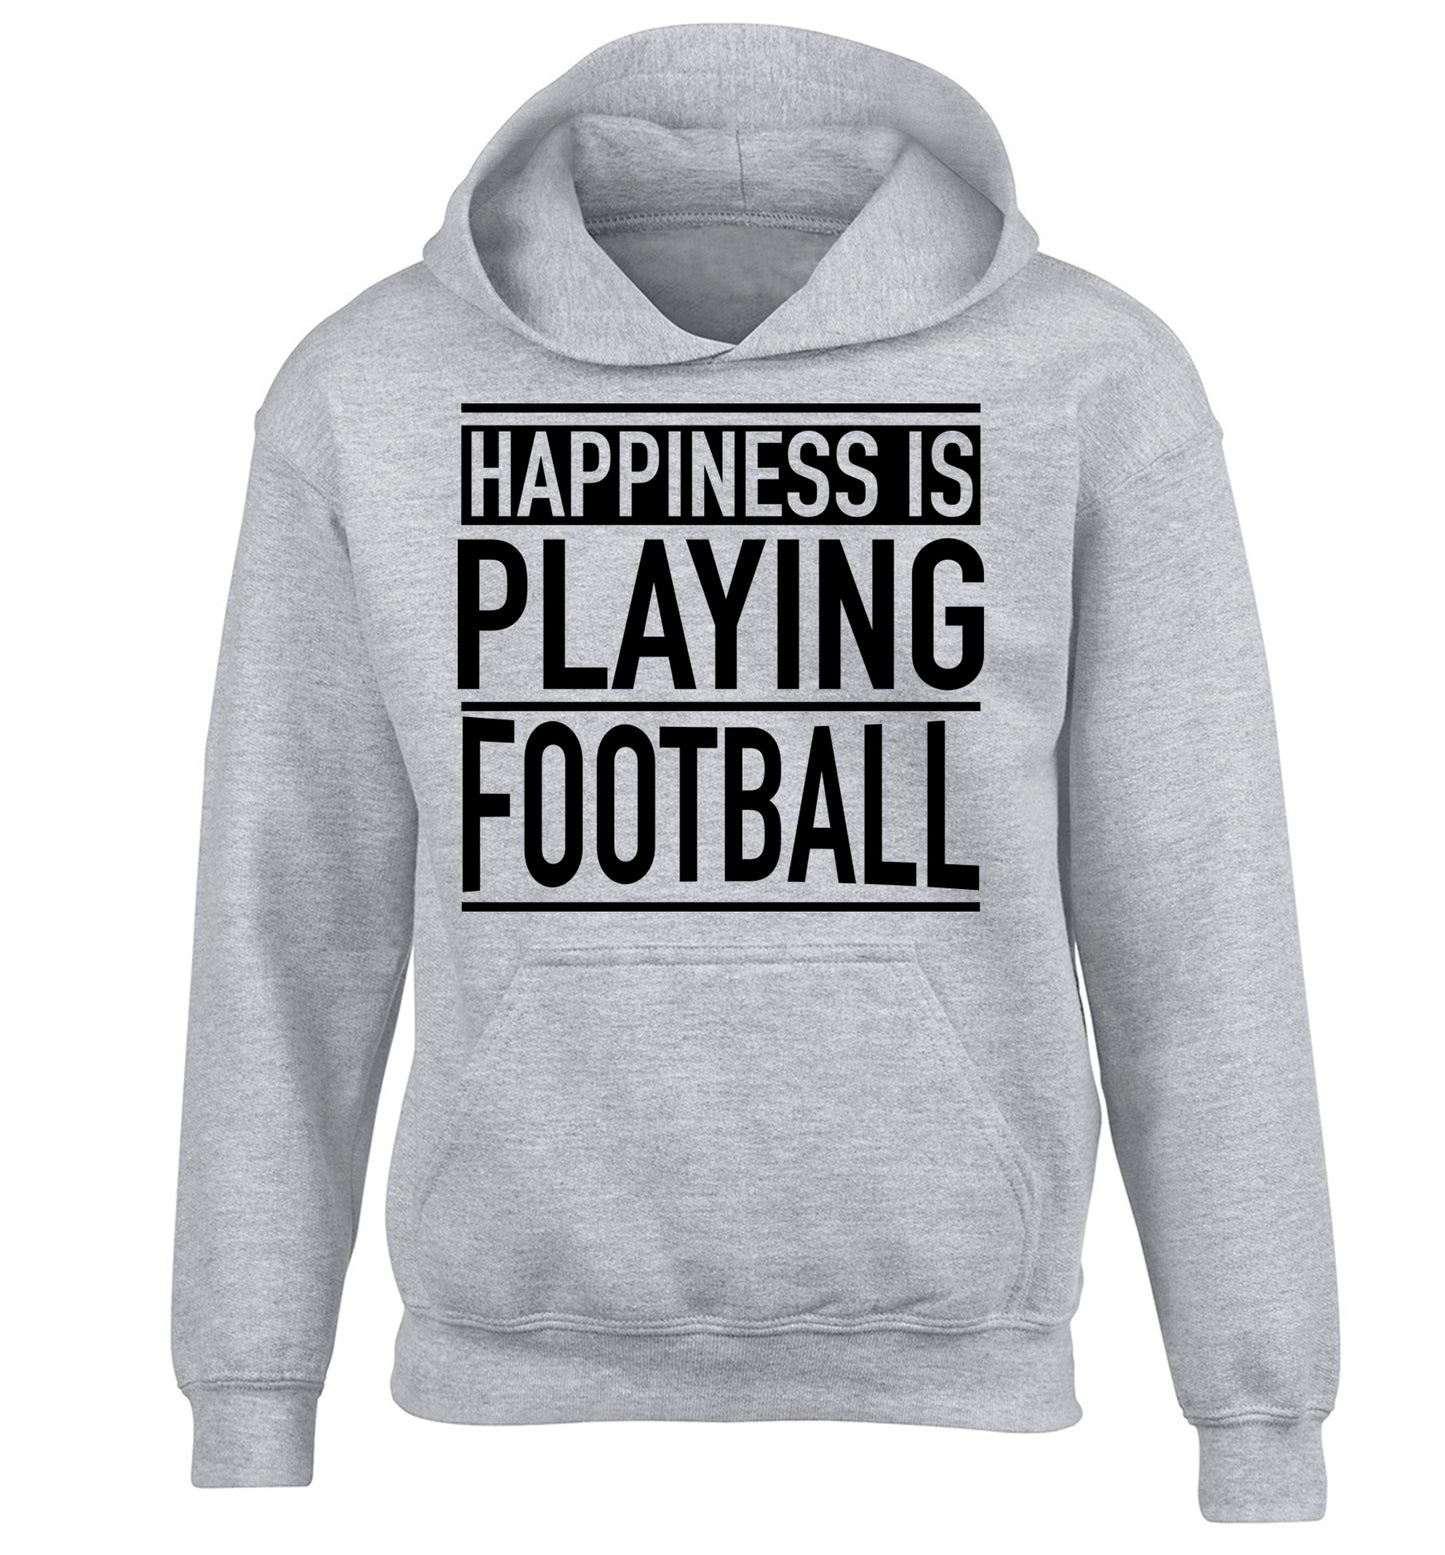 Happiness is playing football children's grey hoodie 12-14 Years